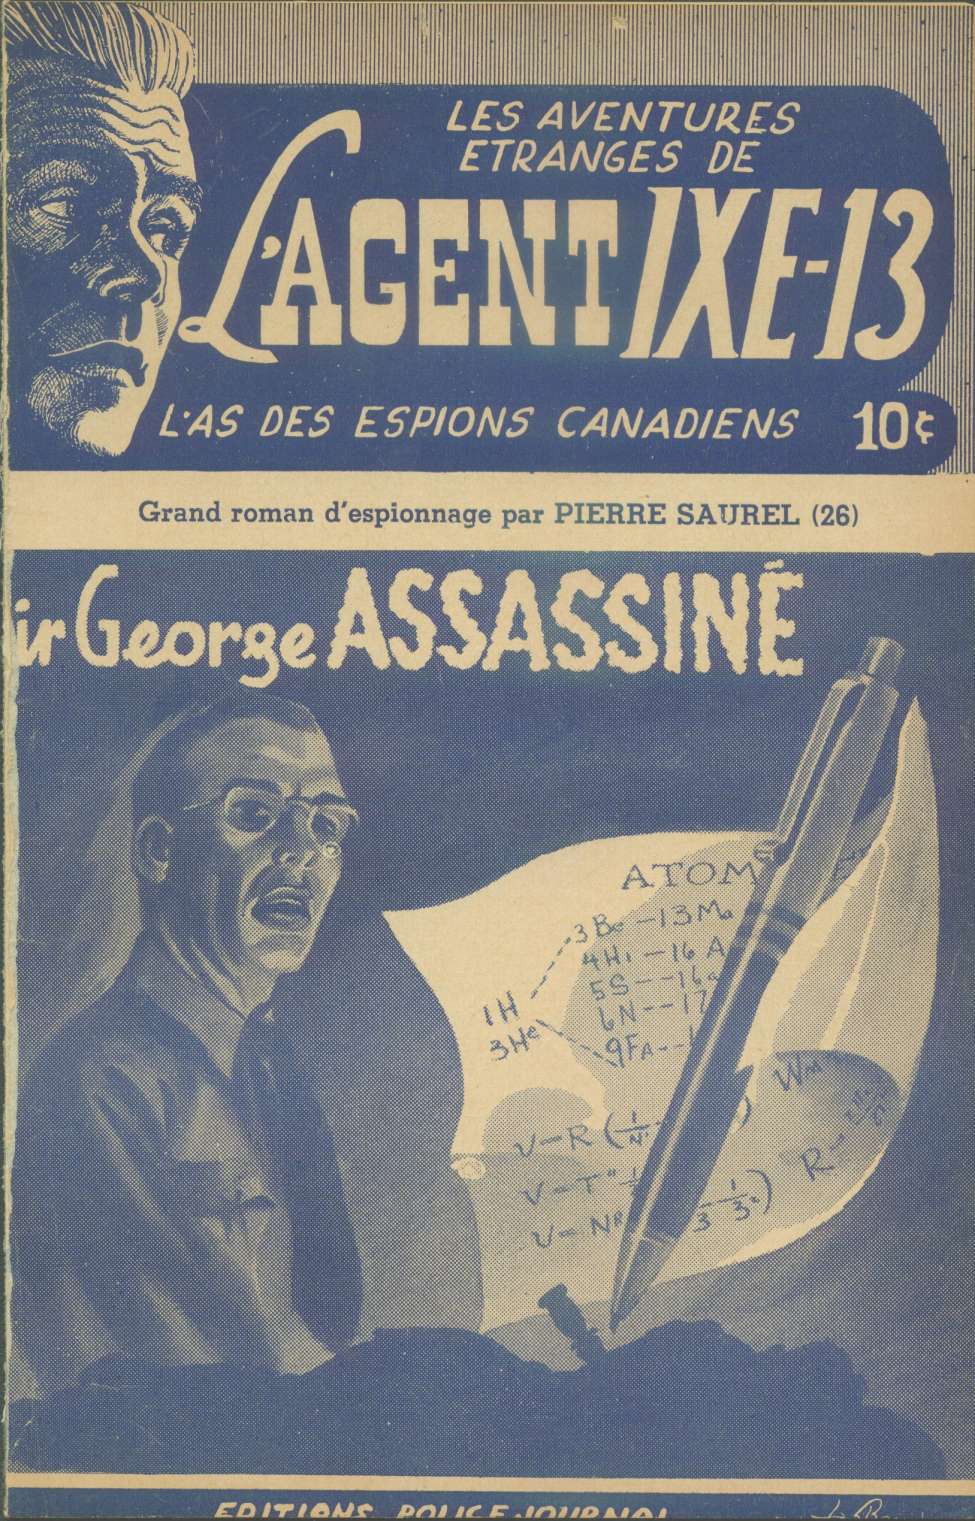 Comic Book Cover For L'Agent IXE-13 v2 26 - Sir George assassiné